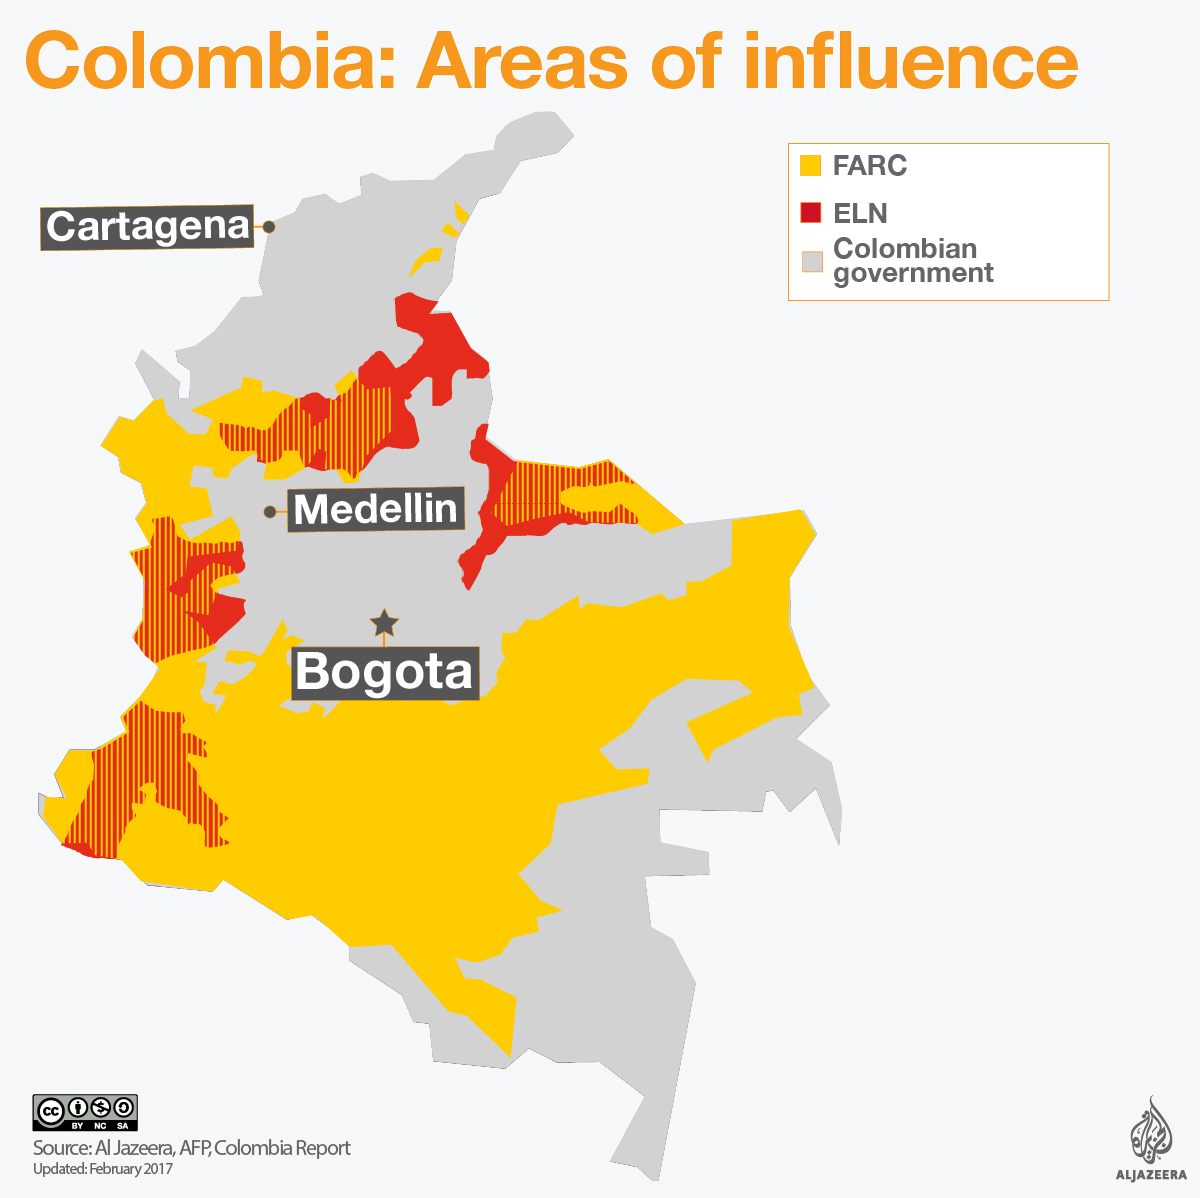 colombia farc eln areas of control influence map infographic